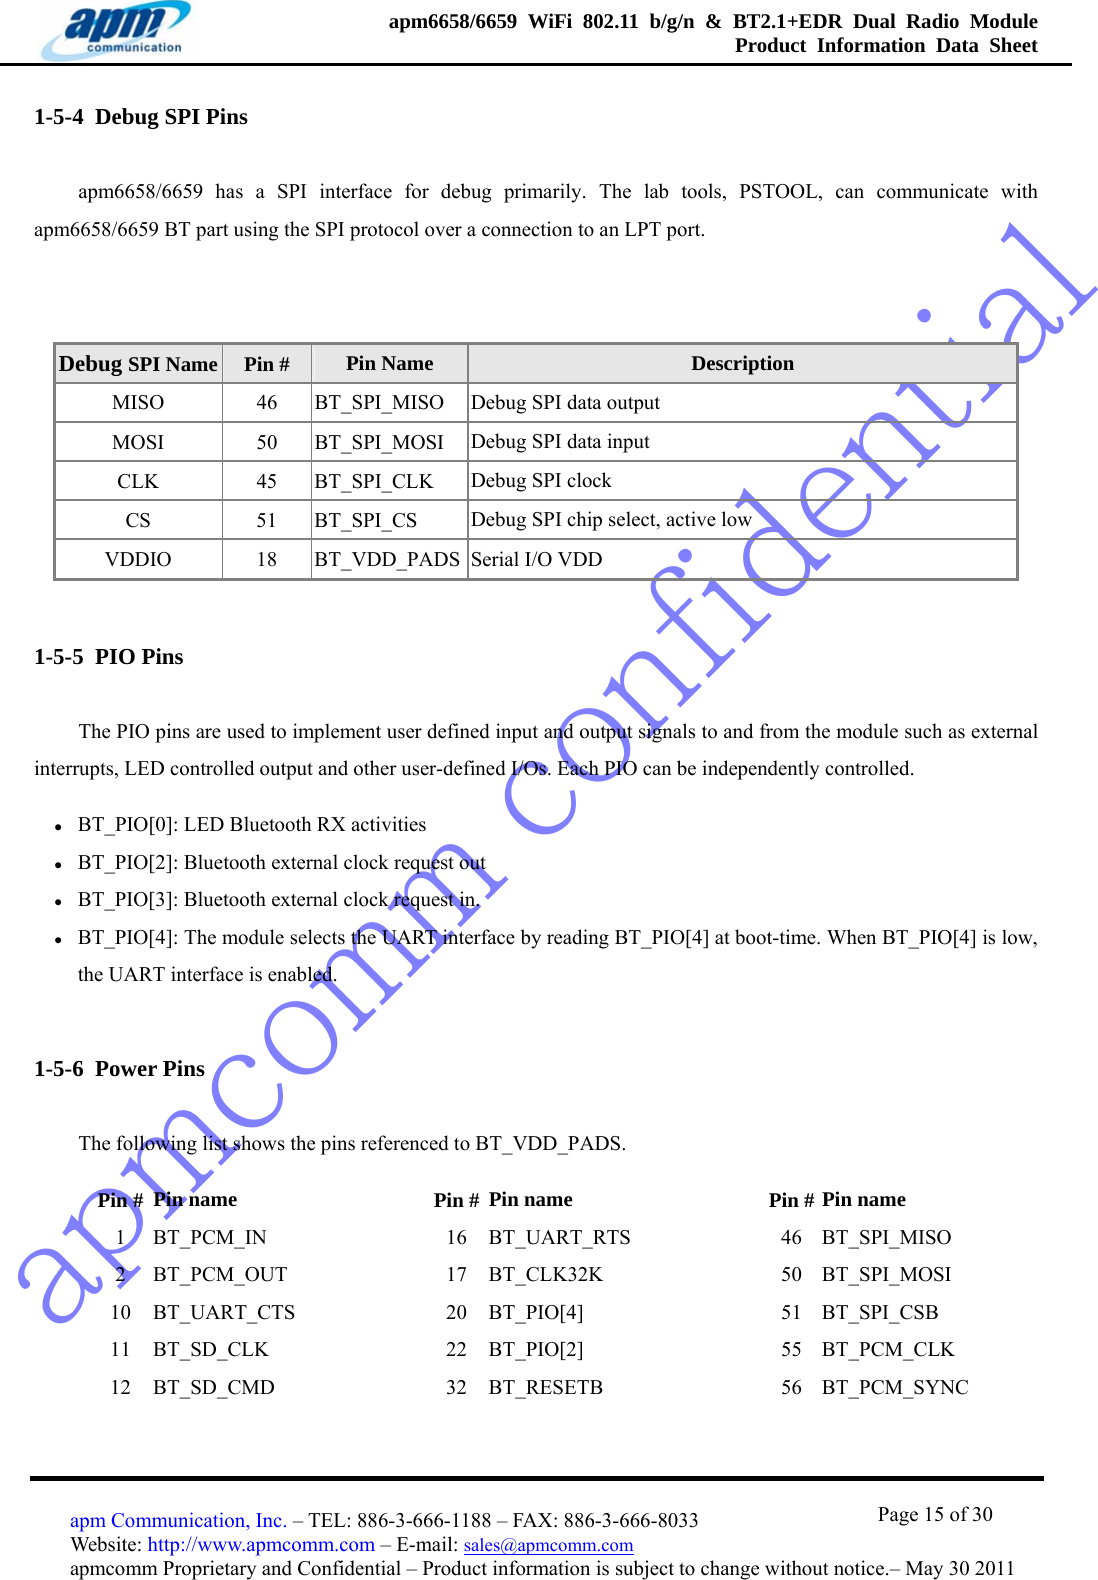 apmcomm confidentialapm6658/6659 WiFi 802.11 b/g/n &amp; BT2.1+EDR Dual Radio Module  Product Information Data Sheet                                       Page 15 of 30 apm Communication, Inc. – TEL: 886-3-666-1188 – FAX: 886-3-666-8033 Website: http://www.apmcomm.com – E-mail: sales@apmcomm.com  apmcomm Proprietary and Confidential – Product information is subject to change without notice.– May 30 2011 1-5-4  Debug SPI Pins apm6658/6659 has a SPI interface for debug primarily. The lab tools, PSTOOL, can communicate with apm6658/6659 BT part using the SPI protocol over a connection to an LPT port.  Debug SPI Name  Pin #  Pin Name  Description MISO 46 BT_SPI_MISO Debug SPI data output MOSI 50 BT_SPI_MOSI Debug SPI data input CLK 45 BT_SPI_CLK Debug SPI clock CS 51 BT_SPI_CS Debug SPI chip select, active low VDDIO  18  BT_VDD_PADS Serial I/O VDD 1-5-5  PIO Pins The PIO pins are used to implement user defined input and output signals to and from the module such as external interrupts, LED controlled output and other user-defined I/Os. Each PIO can be independently controlled. z BT_PIO[0]: LED Bluetooth RX activities z BT_PIO[2]: Bluetooth external clock request out z BT_PIO[3]: Bluetooth external clock request in. z BT_PIO[4]: The module selects the UART interface by reading BT_PIO[4] at boot-time. When BT_PIO[4] is low, the UART interface is enabled. 1-5-6  Power Pins The following list shows the pins referenced to BT_VDD_PADS. Pin #  Pin name    Pin # Pin name   Pin # Pin name 1 BT_PCM_IN   16 BT_UART_RTS  46 BT_SPI_MISO 2 BT_PCM_OUT   17 BT_CLK32K   50 BT_SPI_MOSI 10 BT_UART_CTS   20 BT_PIO[4]   51 BT_SPI_CSB 11 BT_SD_CLK   22 BT_PIO[2]   55 BT_PCM_CLK 12 BT_SD_CMD   32 BT_RESETB   56 BT_PCM_SYNC